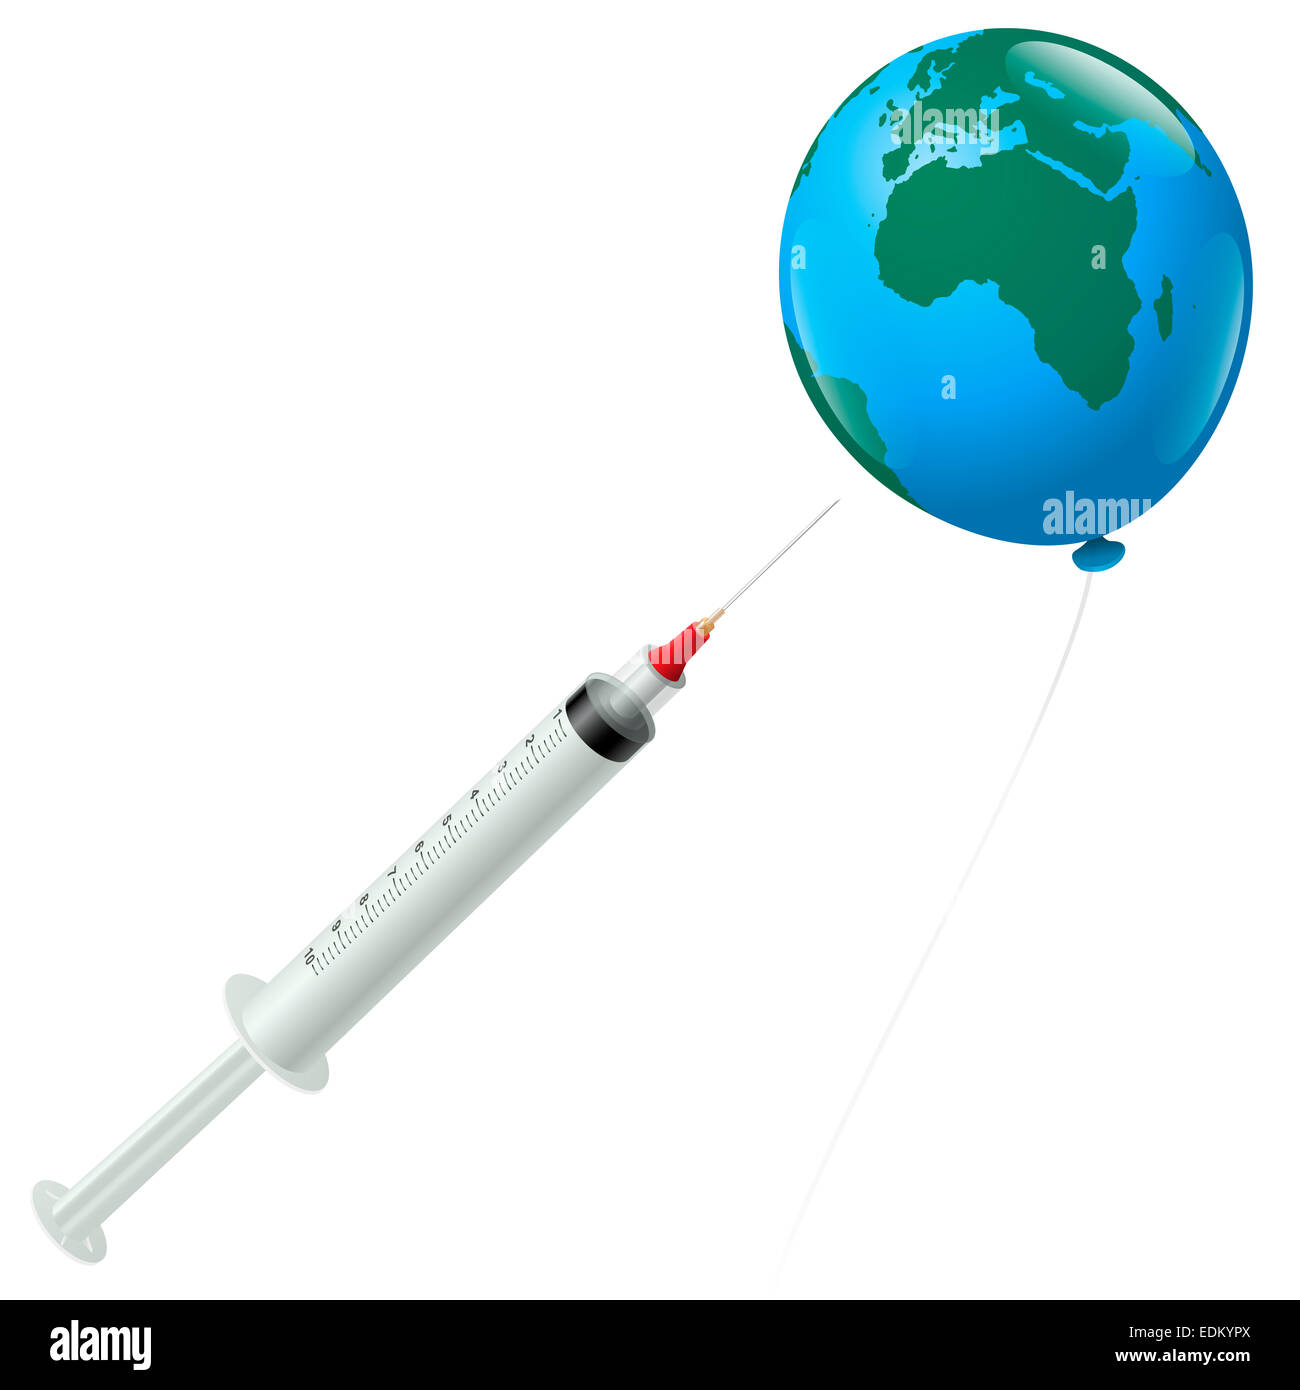 A syringe tries to stitch a planet earth balloon with africa in foreground. Stock Photo